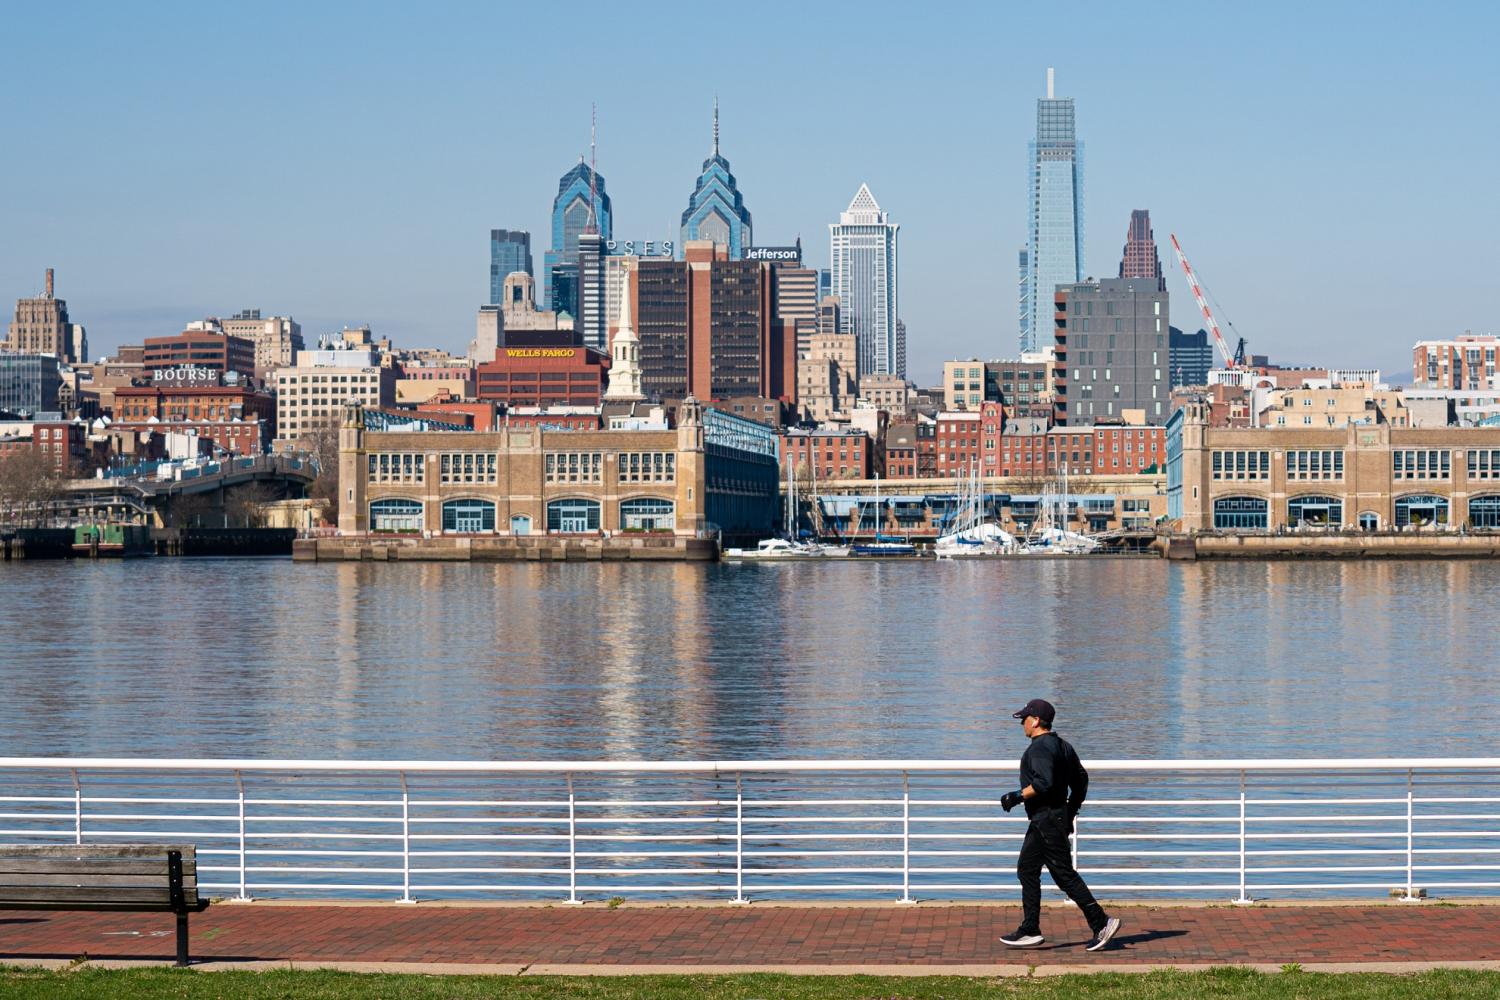 Mar 26, 2020; Philadelphia, PA, USA; A jogger runs along a river path in Camden NJ with the Philadelphia skyline in the background. Mandatory Credit: Bill Streicher-USA TODAY NETWORK